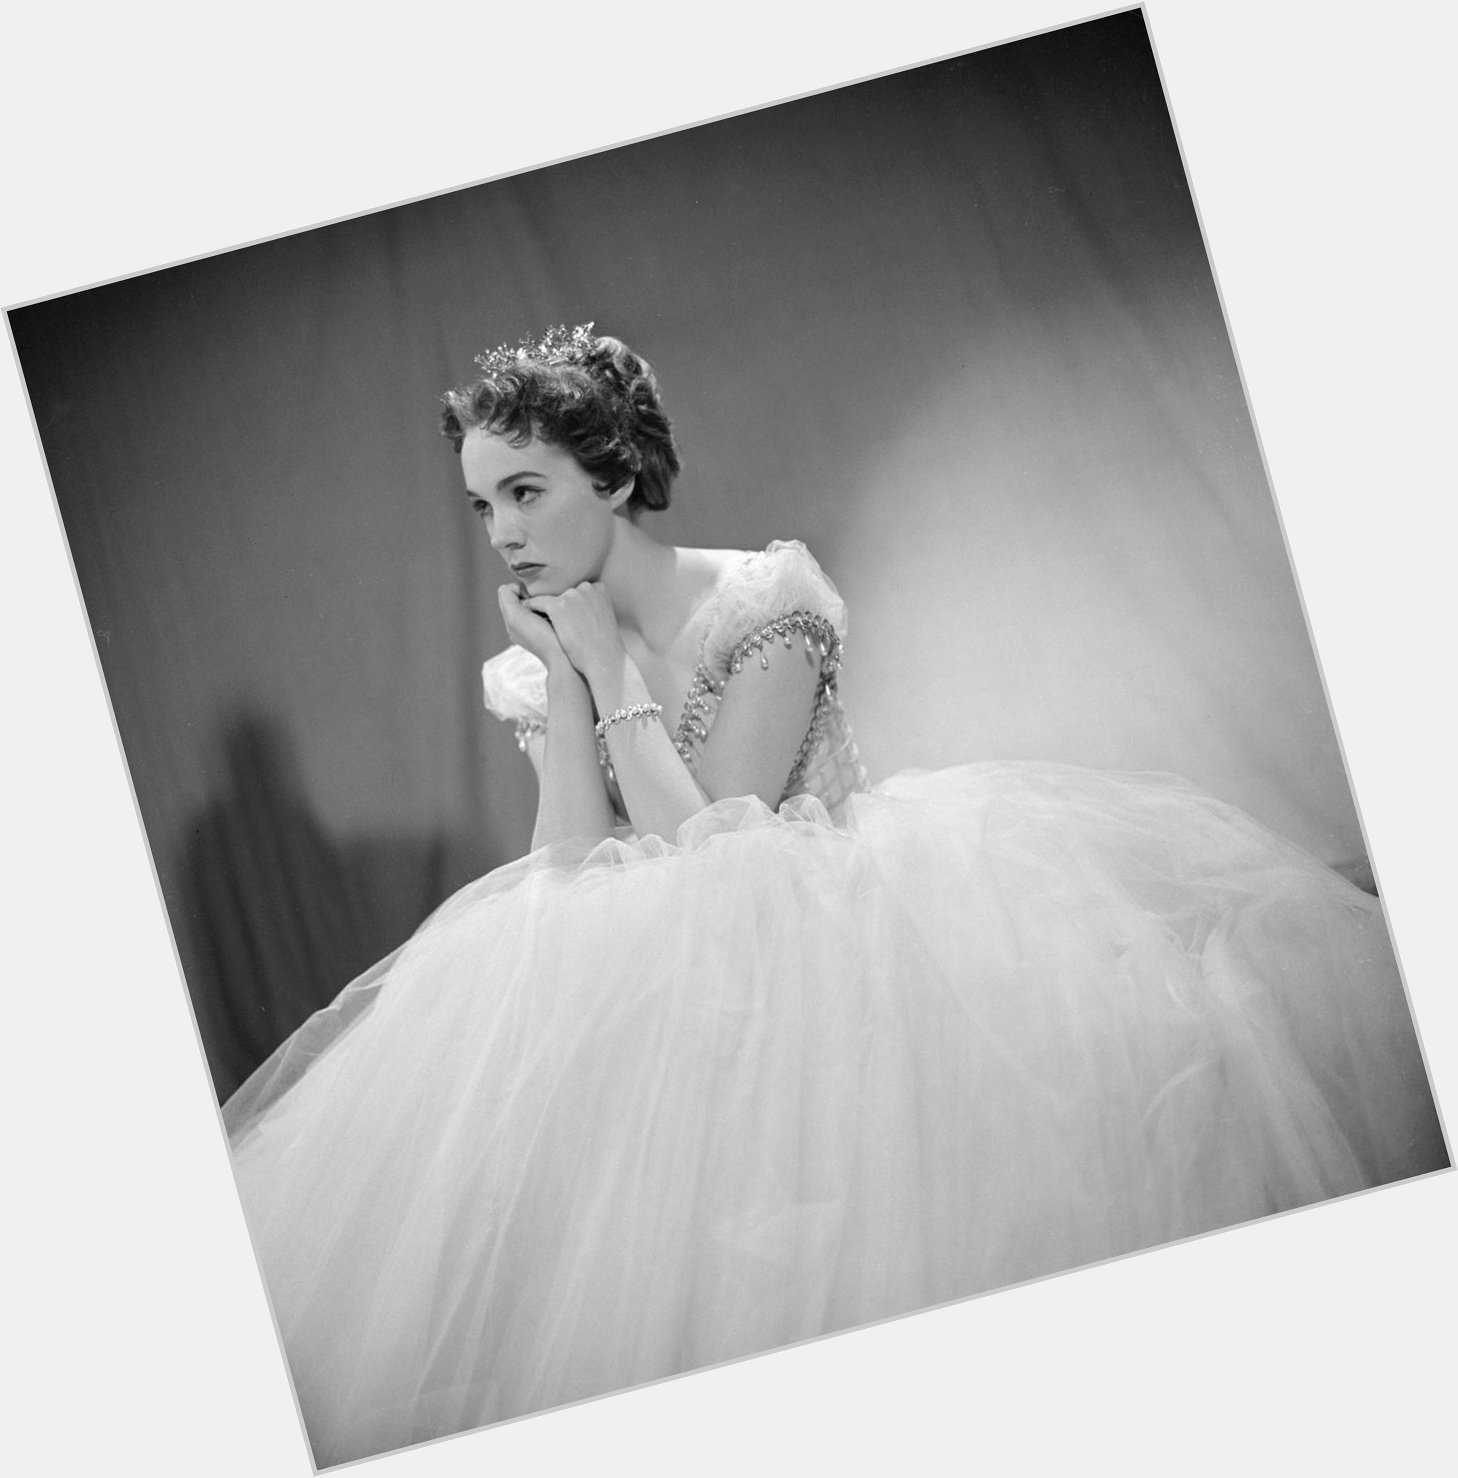 Happy Birthday Julie Andrews - eighty years old today! Here she is as Cinderella for a CBS TV production in 1957. 